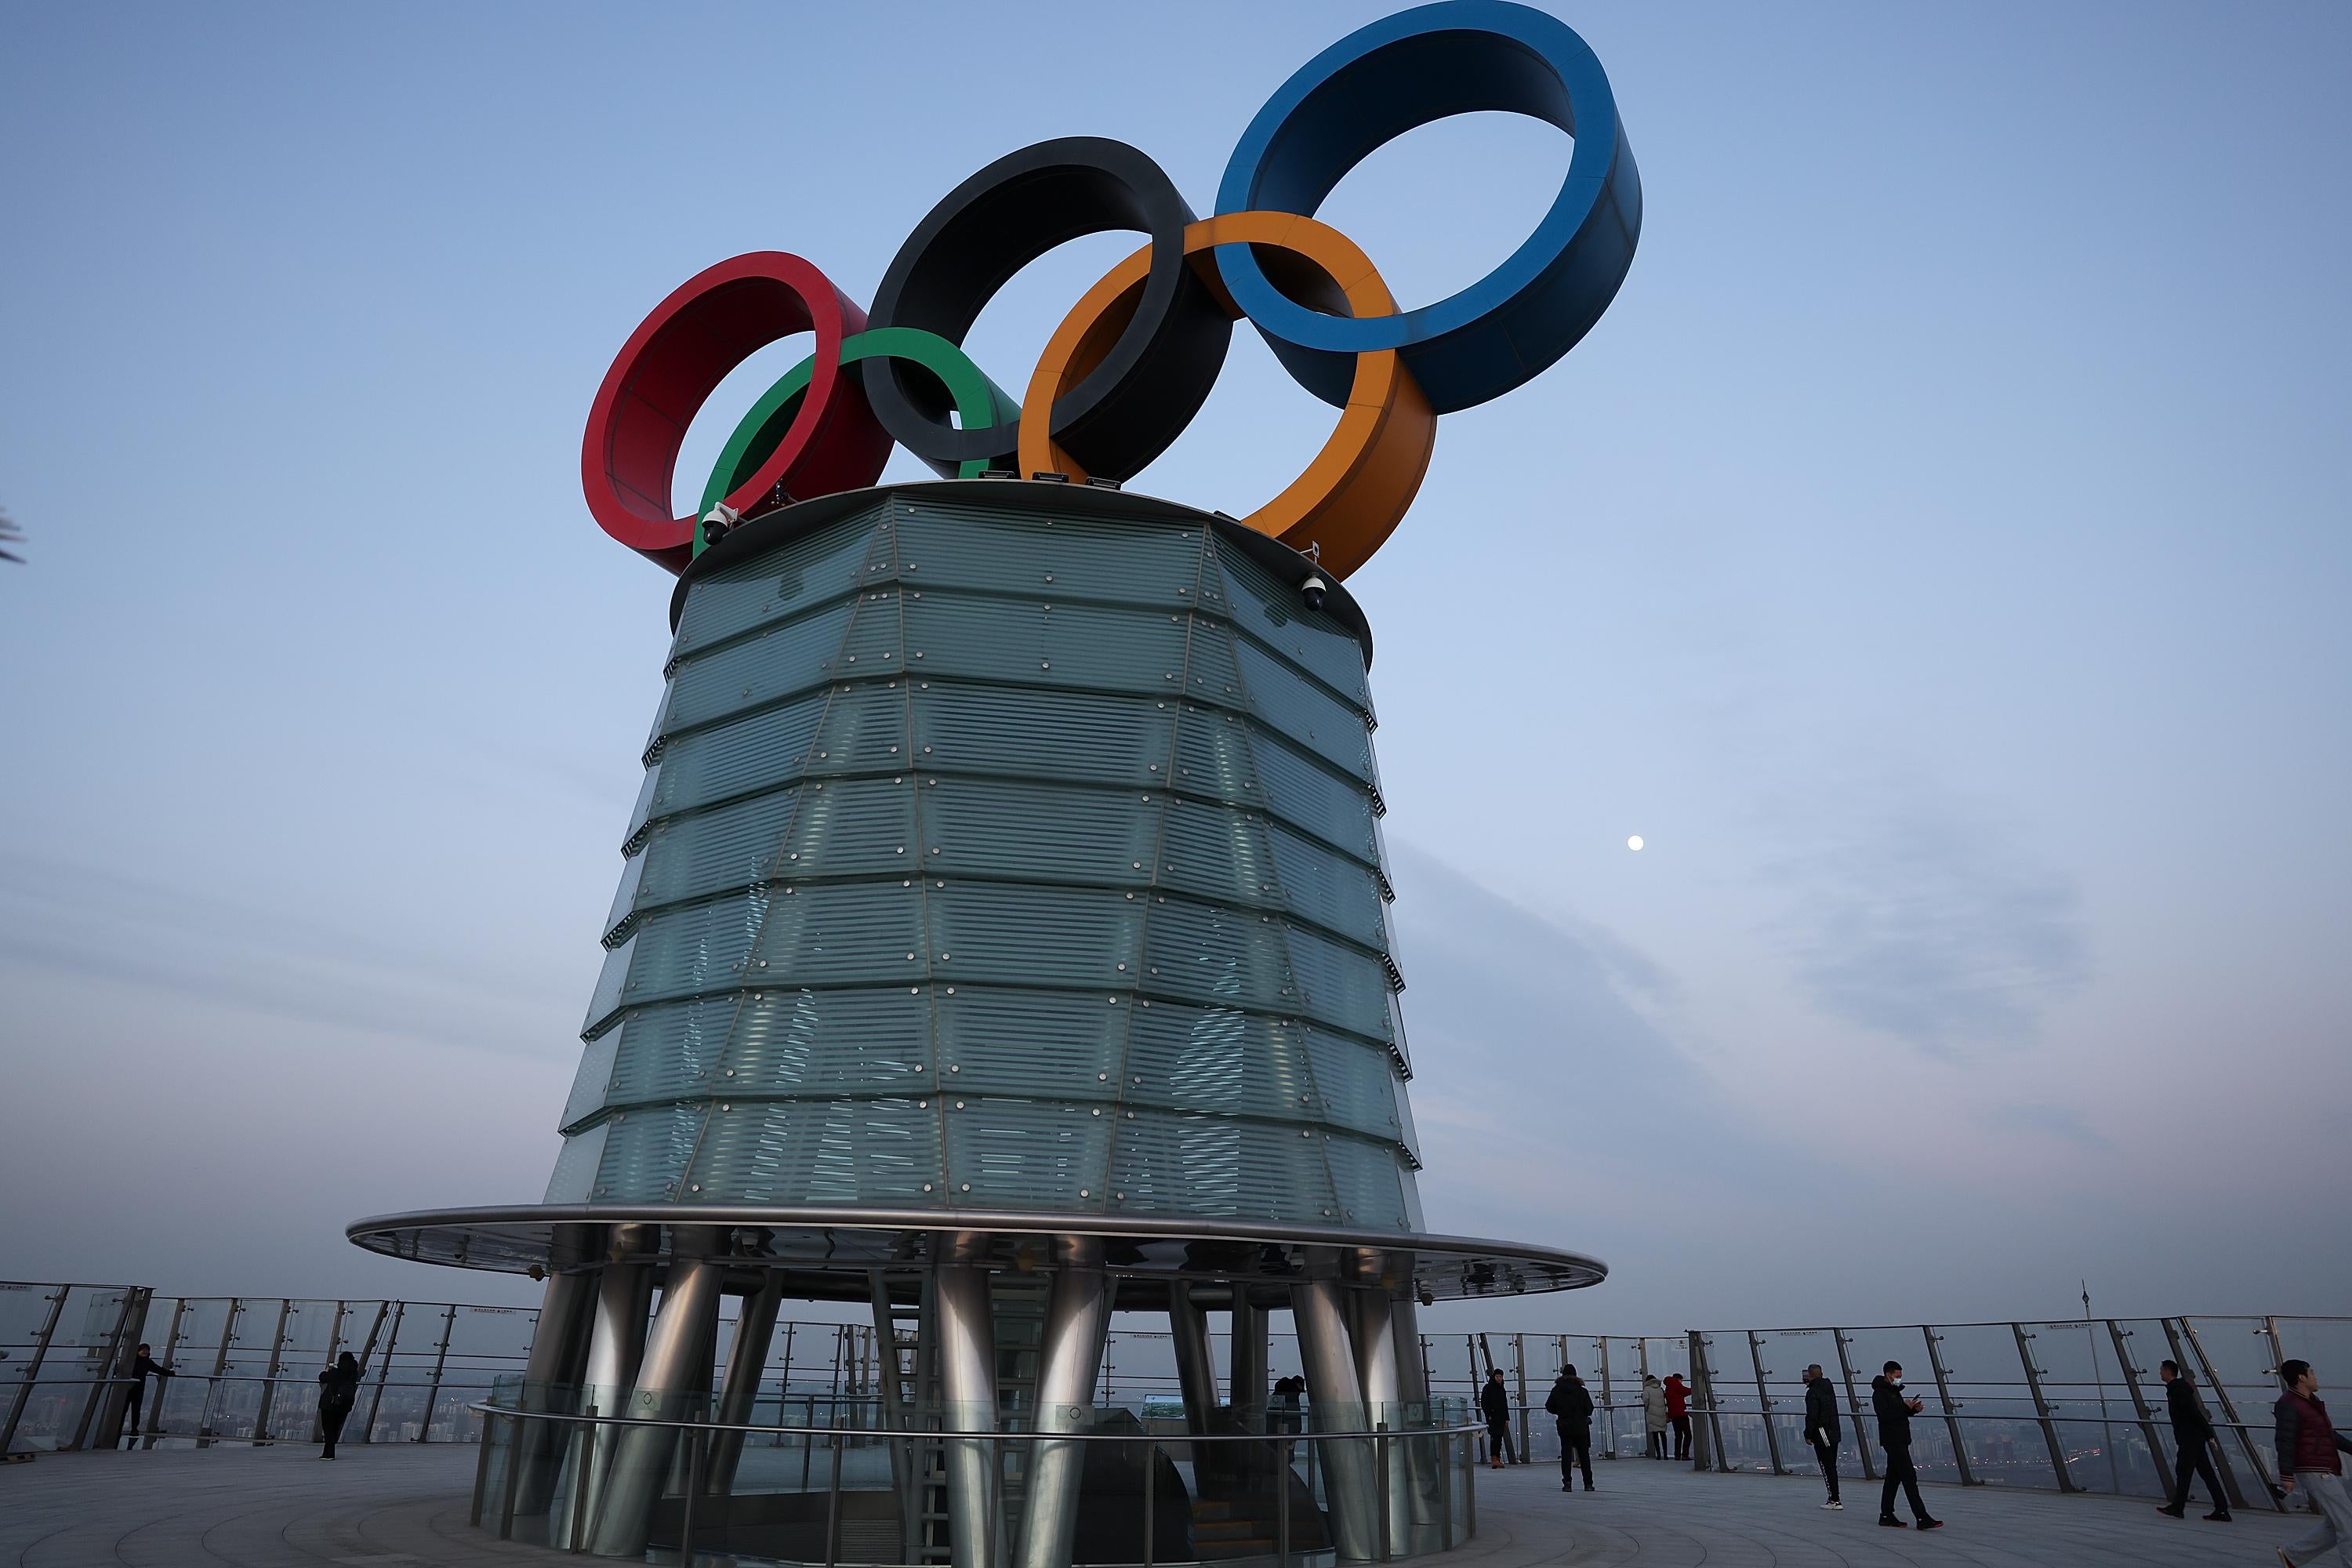 Visitors pose for photographs with the Olympic rings at the Beijing Olympic Tower on January 16, 2022 in Beijing, China.